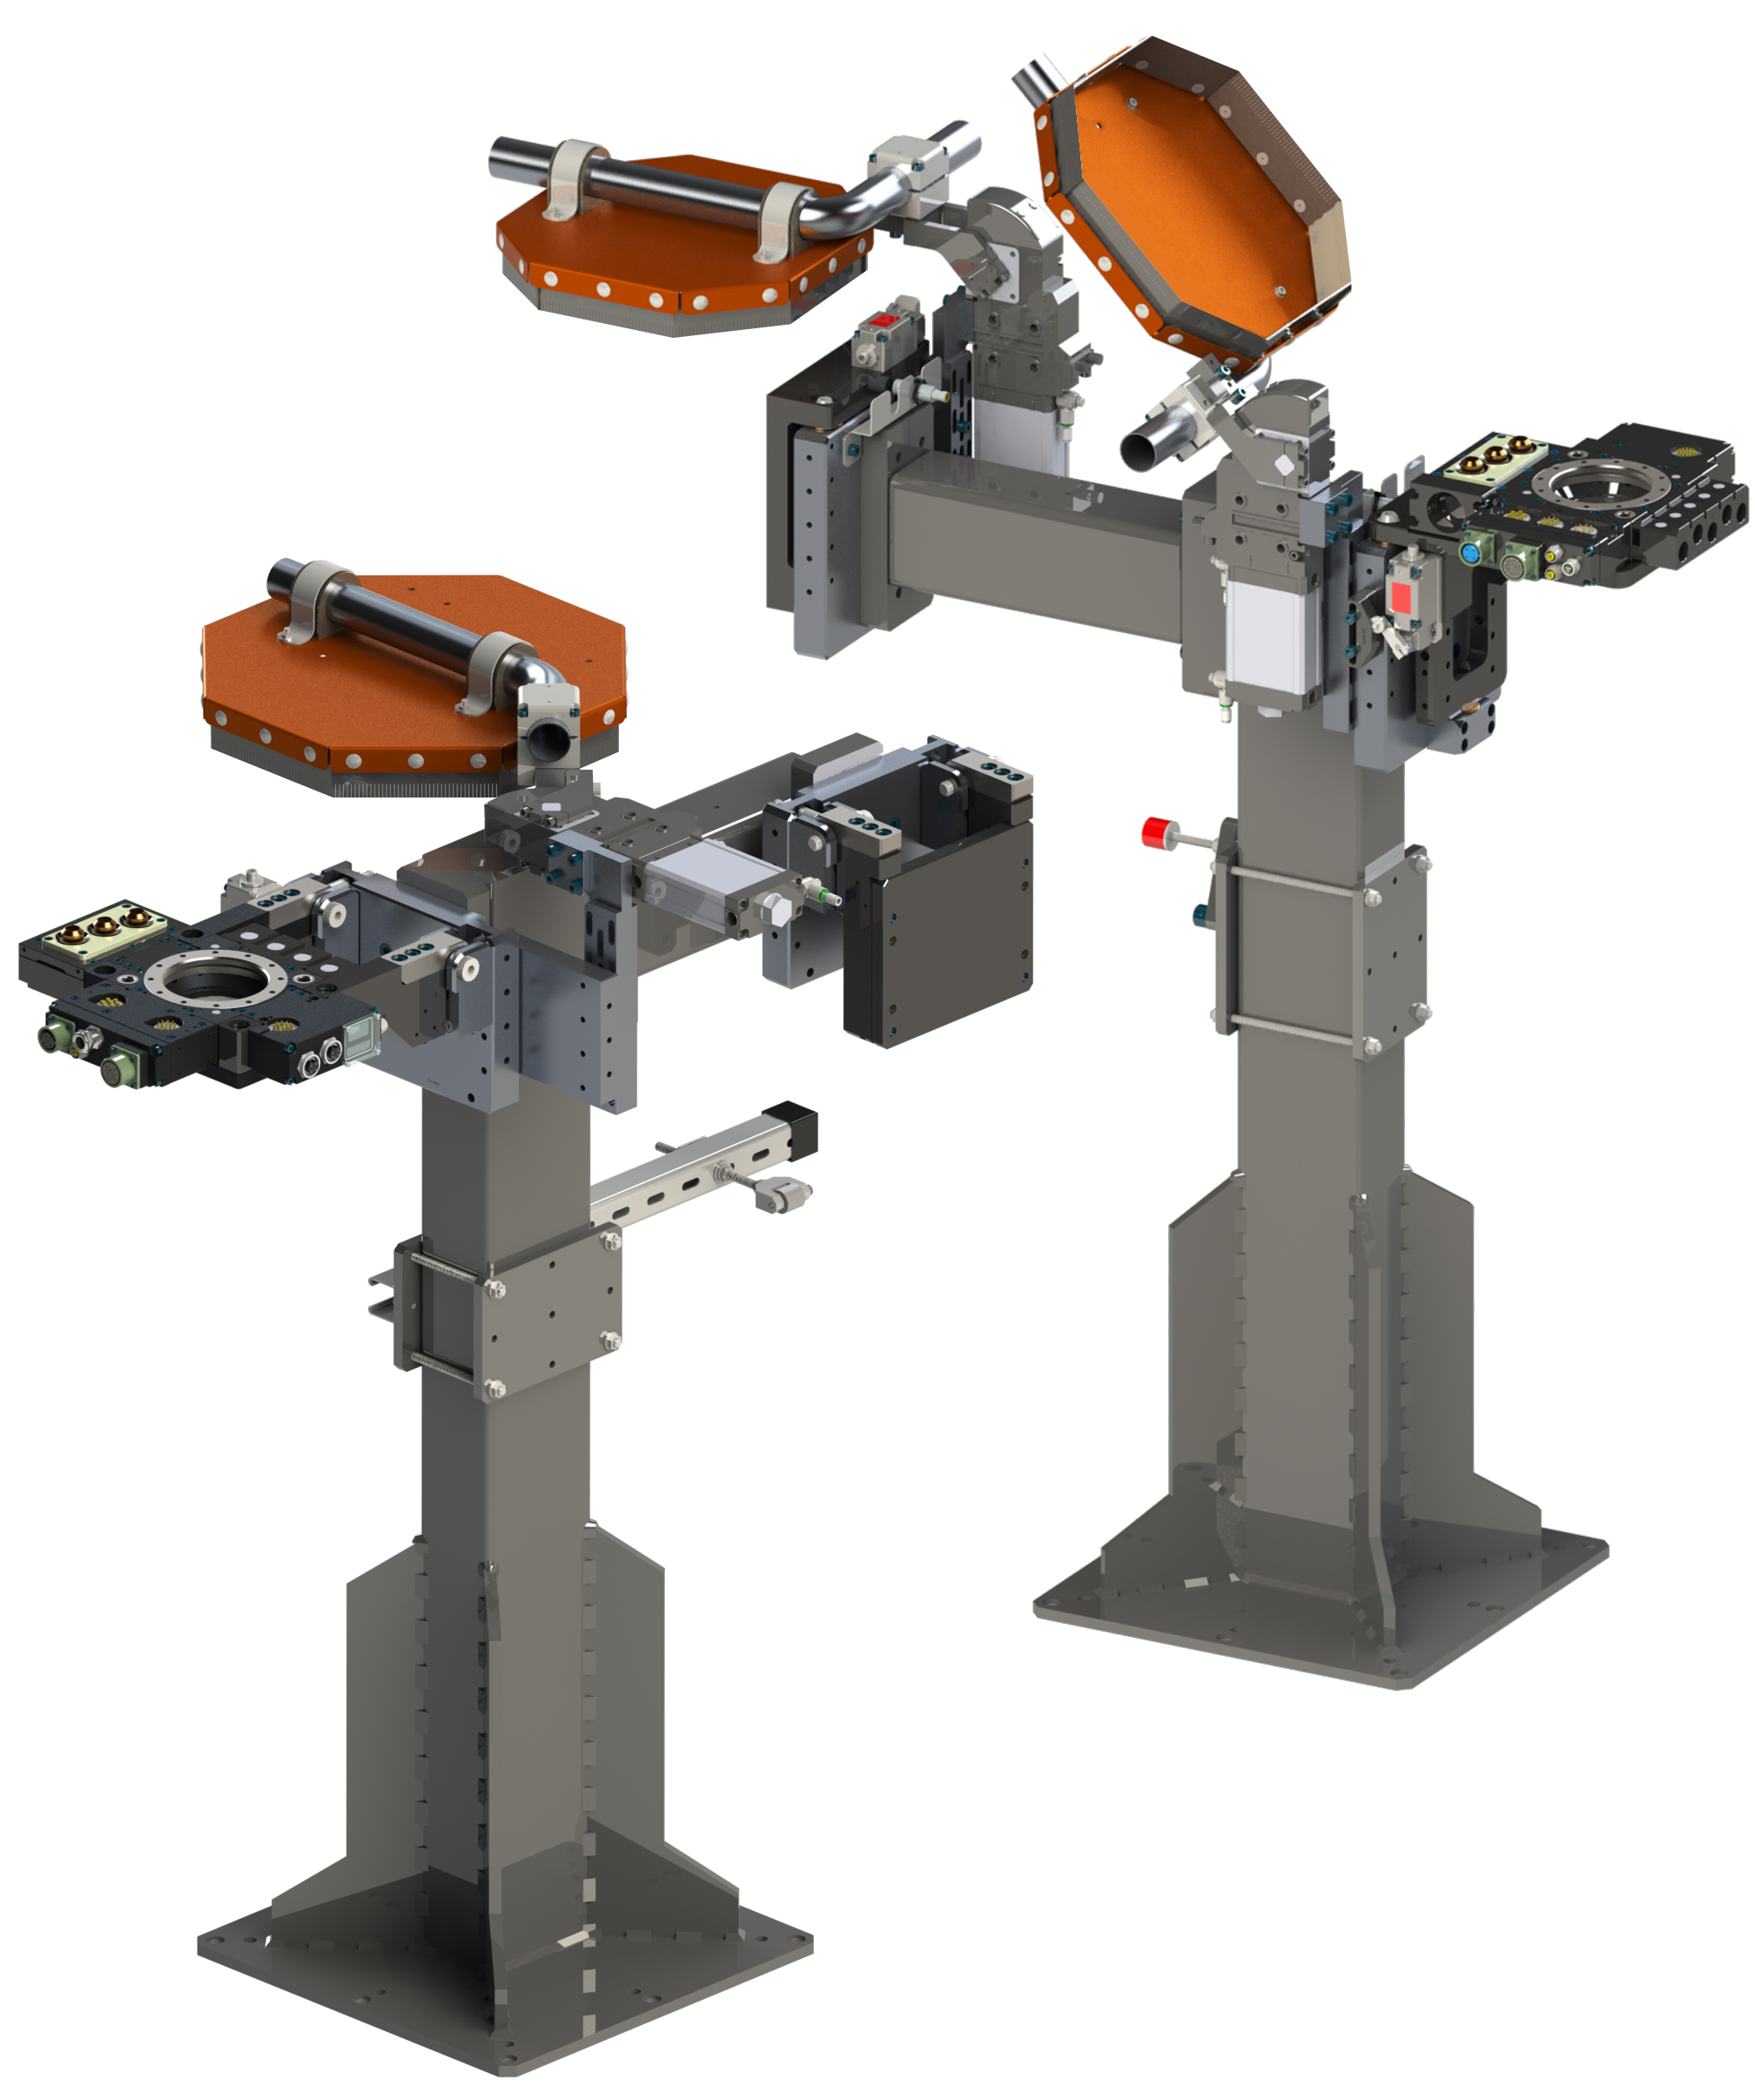 ATI Robot Tool Stand for storage of robotic end effector tooling.